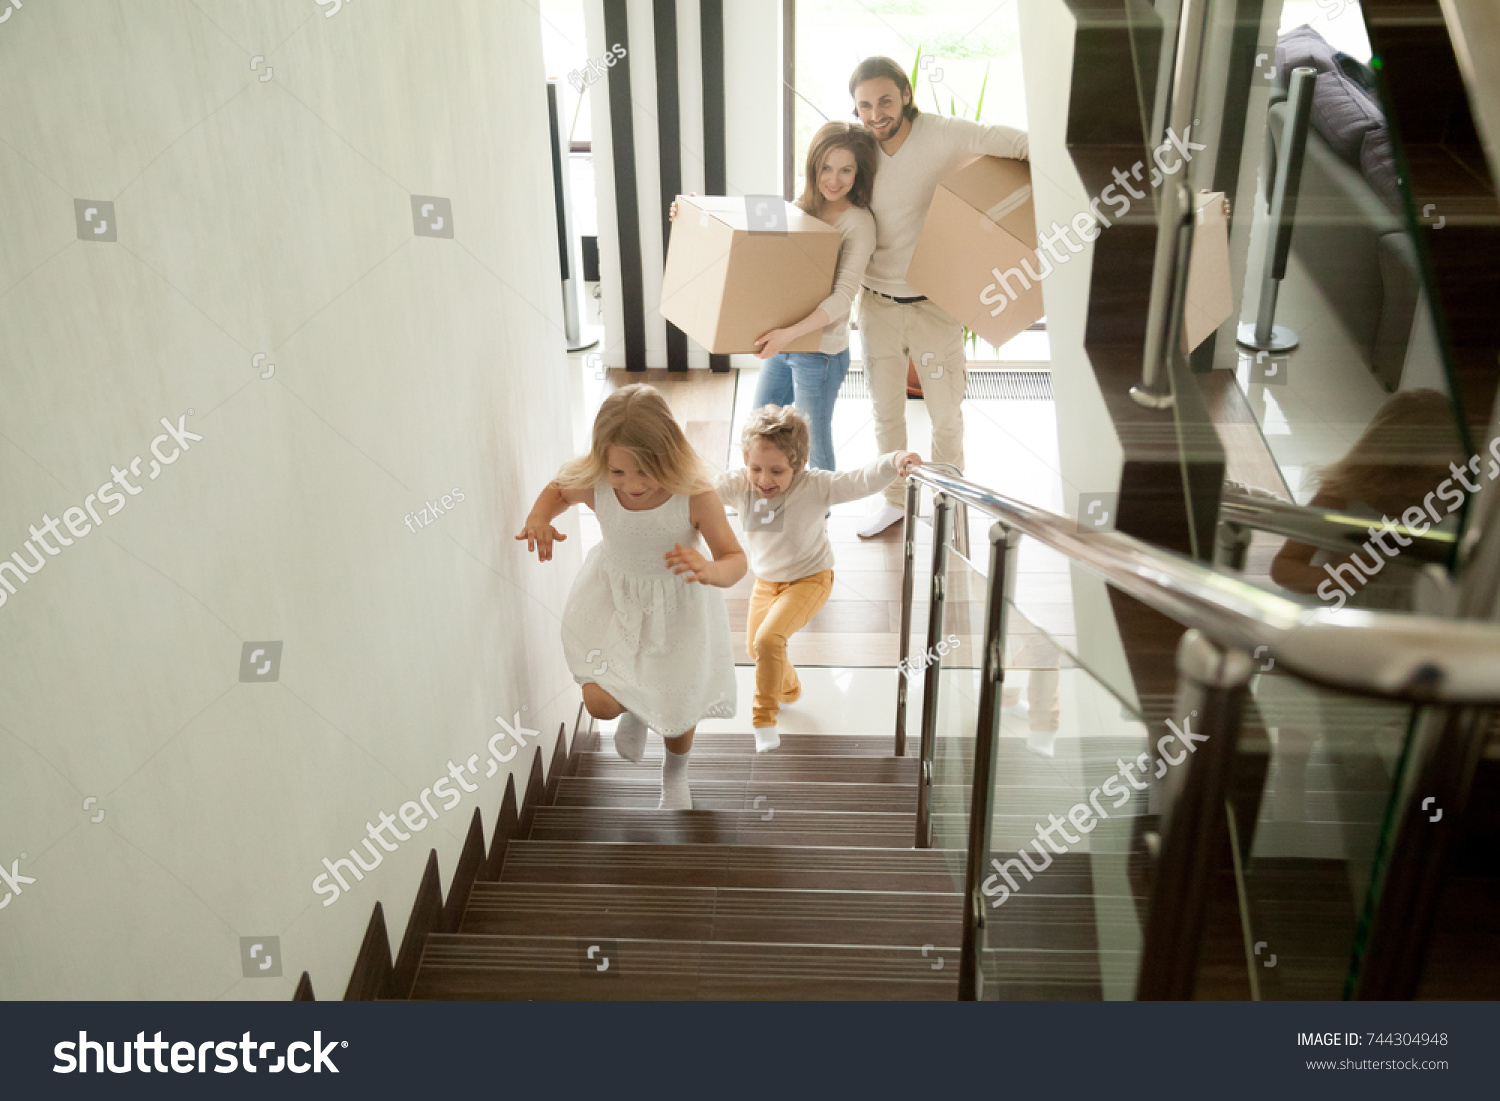 Happy children going upstairs inside two story big house, excited kids having fun stepping walking up stairs running to their rooms while parents holding boxes, family moving in relocating new home  #744304948